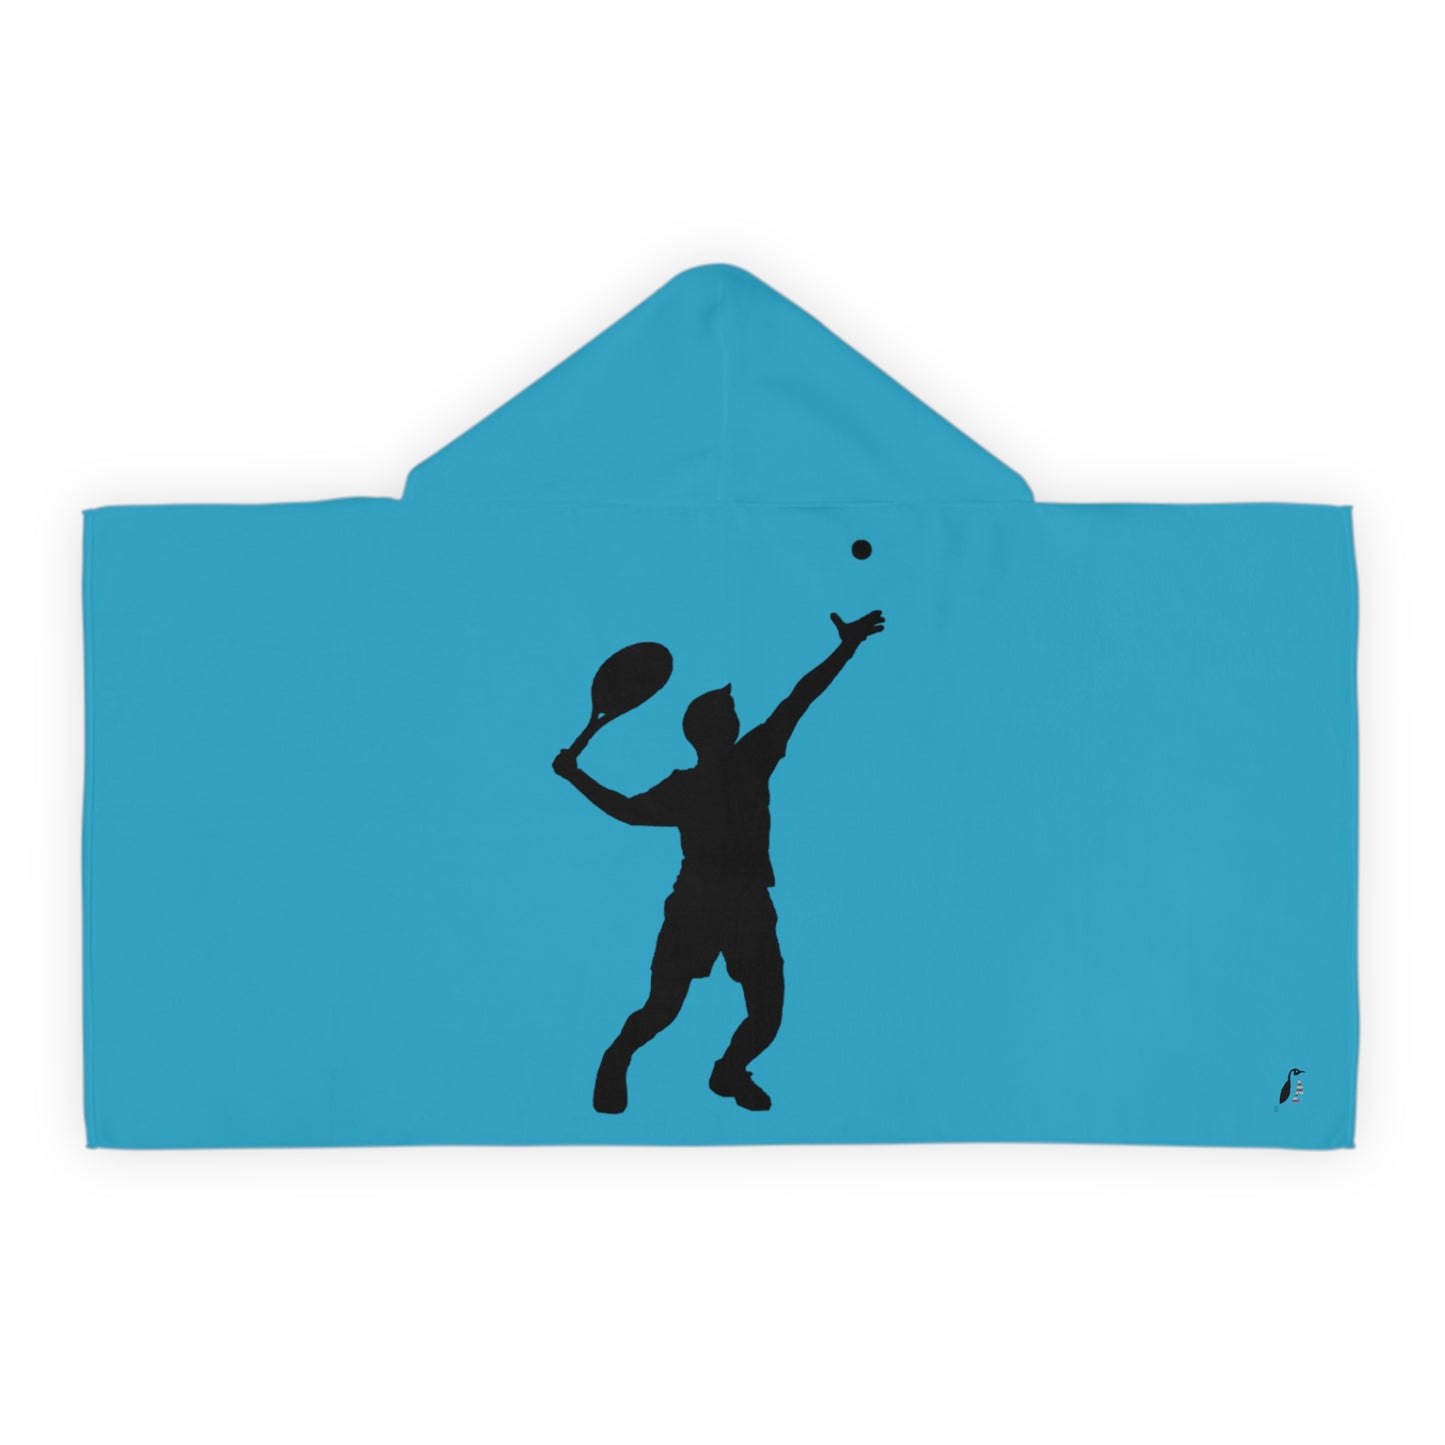 Youth Hooded Towel: Tennis Turquoise